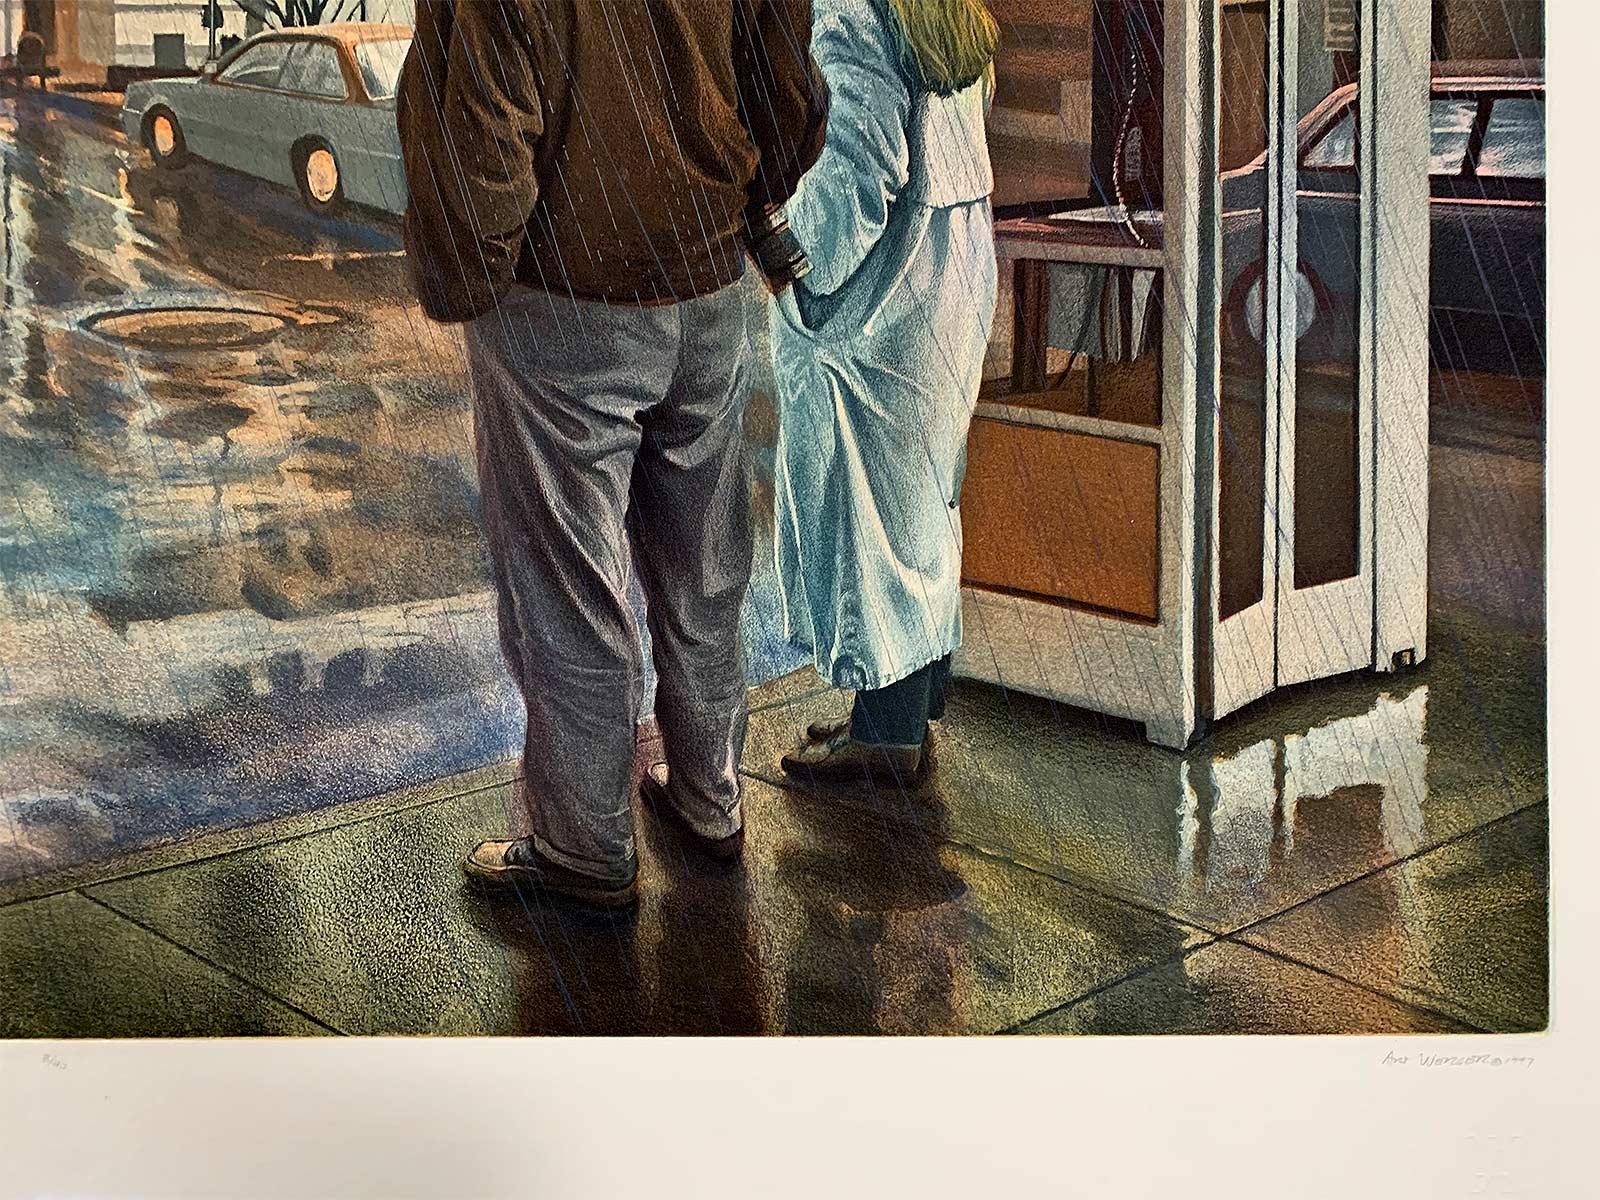 Steady Rain (Rain is falling on a street in Baltimore, MD and umbrellas are out) - American Modern Print by Art Werger